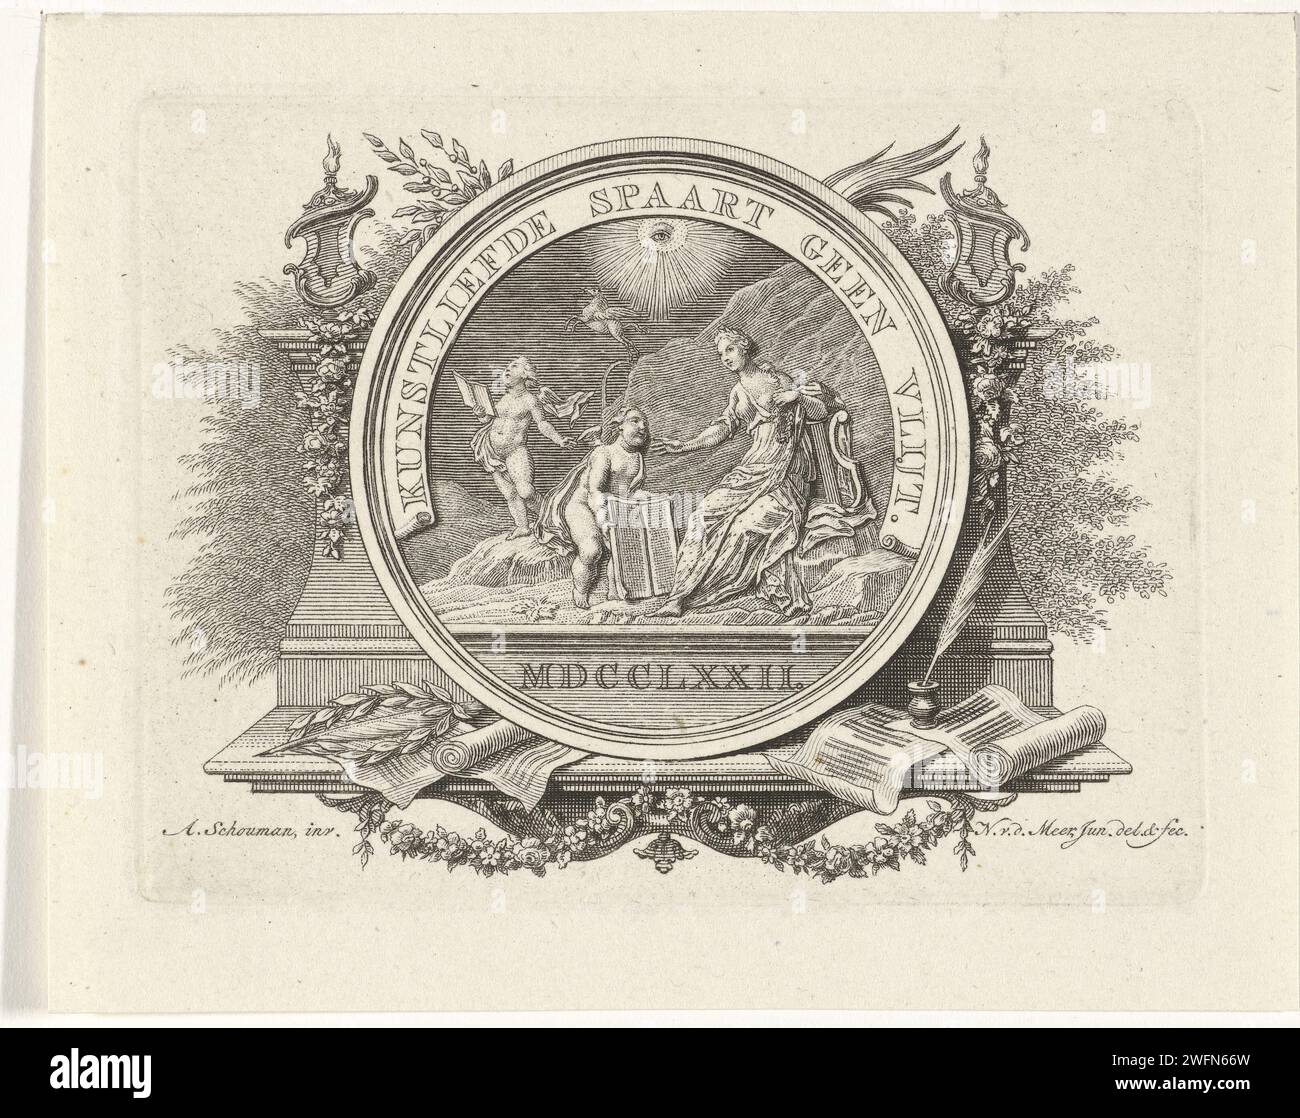 Emblem of the Society 'Kunstliefde does not save a diligence' in The Hague, Noah van der Meer (II), After Aert Schouman, 1772 - 1773 print Vignette with medallion with the emblem of the poetry 'Kunstliefde does not save a diligence' in The Hague. The Society was founded in 1772. Erato, the muse of the lyricism, with a winch on Mount Helicon. Amsterdam paper etching / engraving Erato (one of the Muses); 'Erato' (Ripa). the all-seeing eye, triangle with eye  symbol of God the Father. cupids: 'amores', 'amoretti', 'putti'. Pegasus, the winged horse The Hague Stock Photo